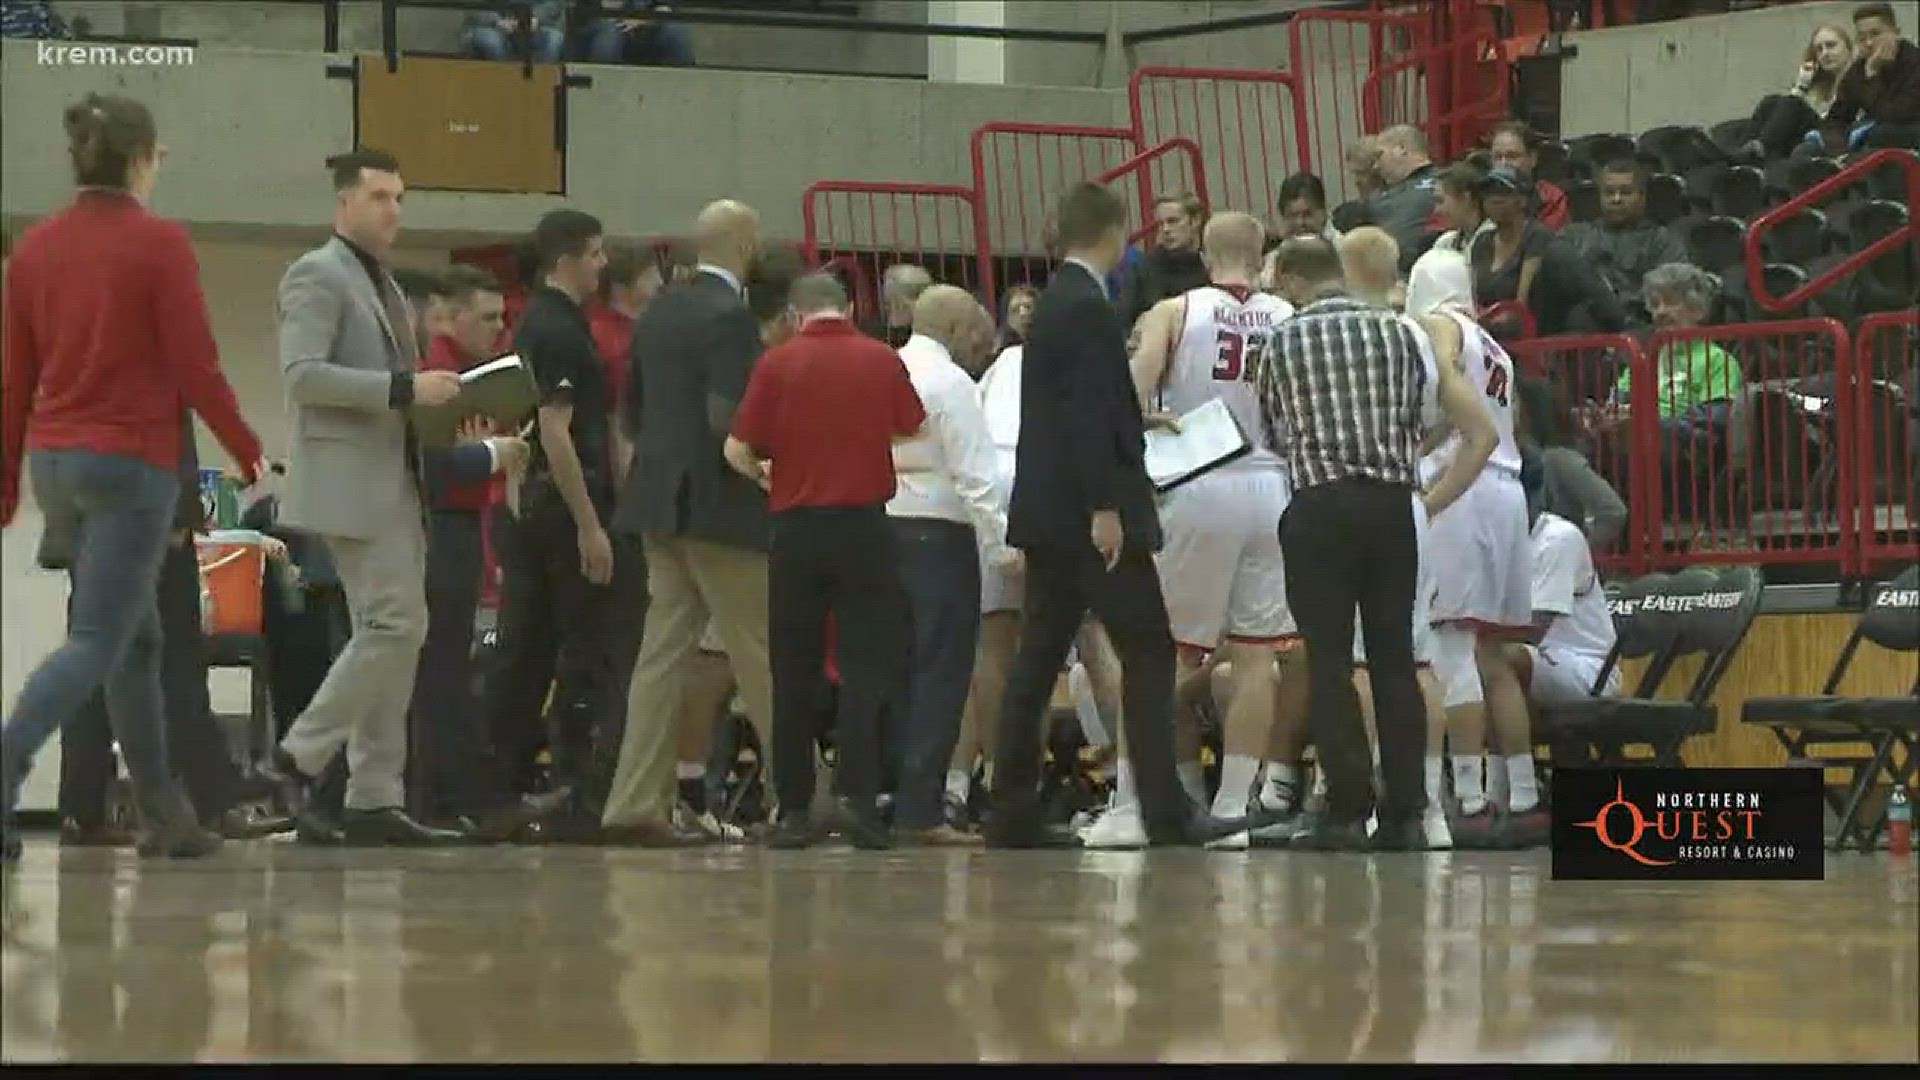 Eastern Washington played its first game at home in more than a month and took care of business easily against CSUN.